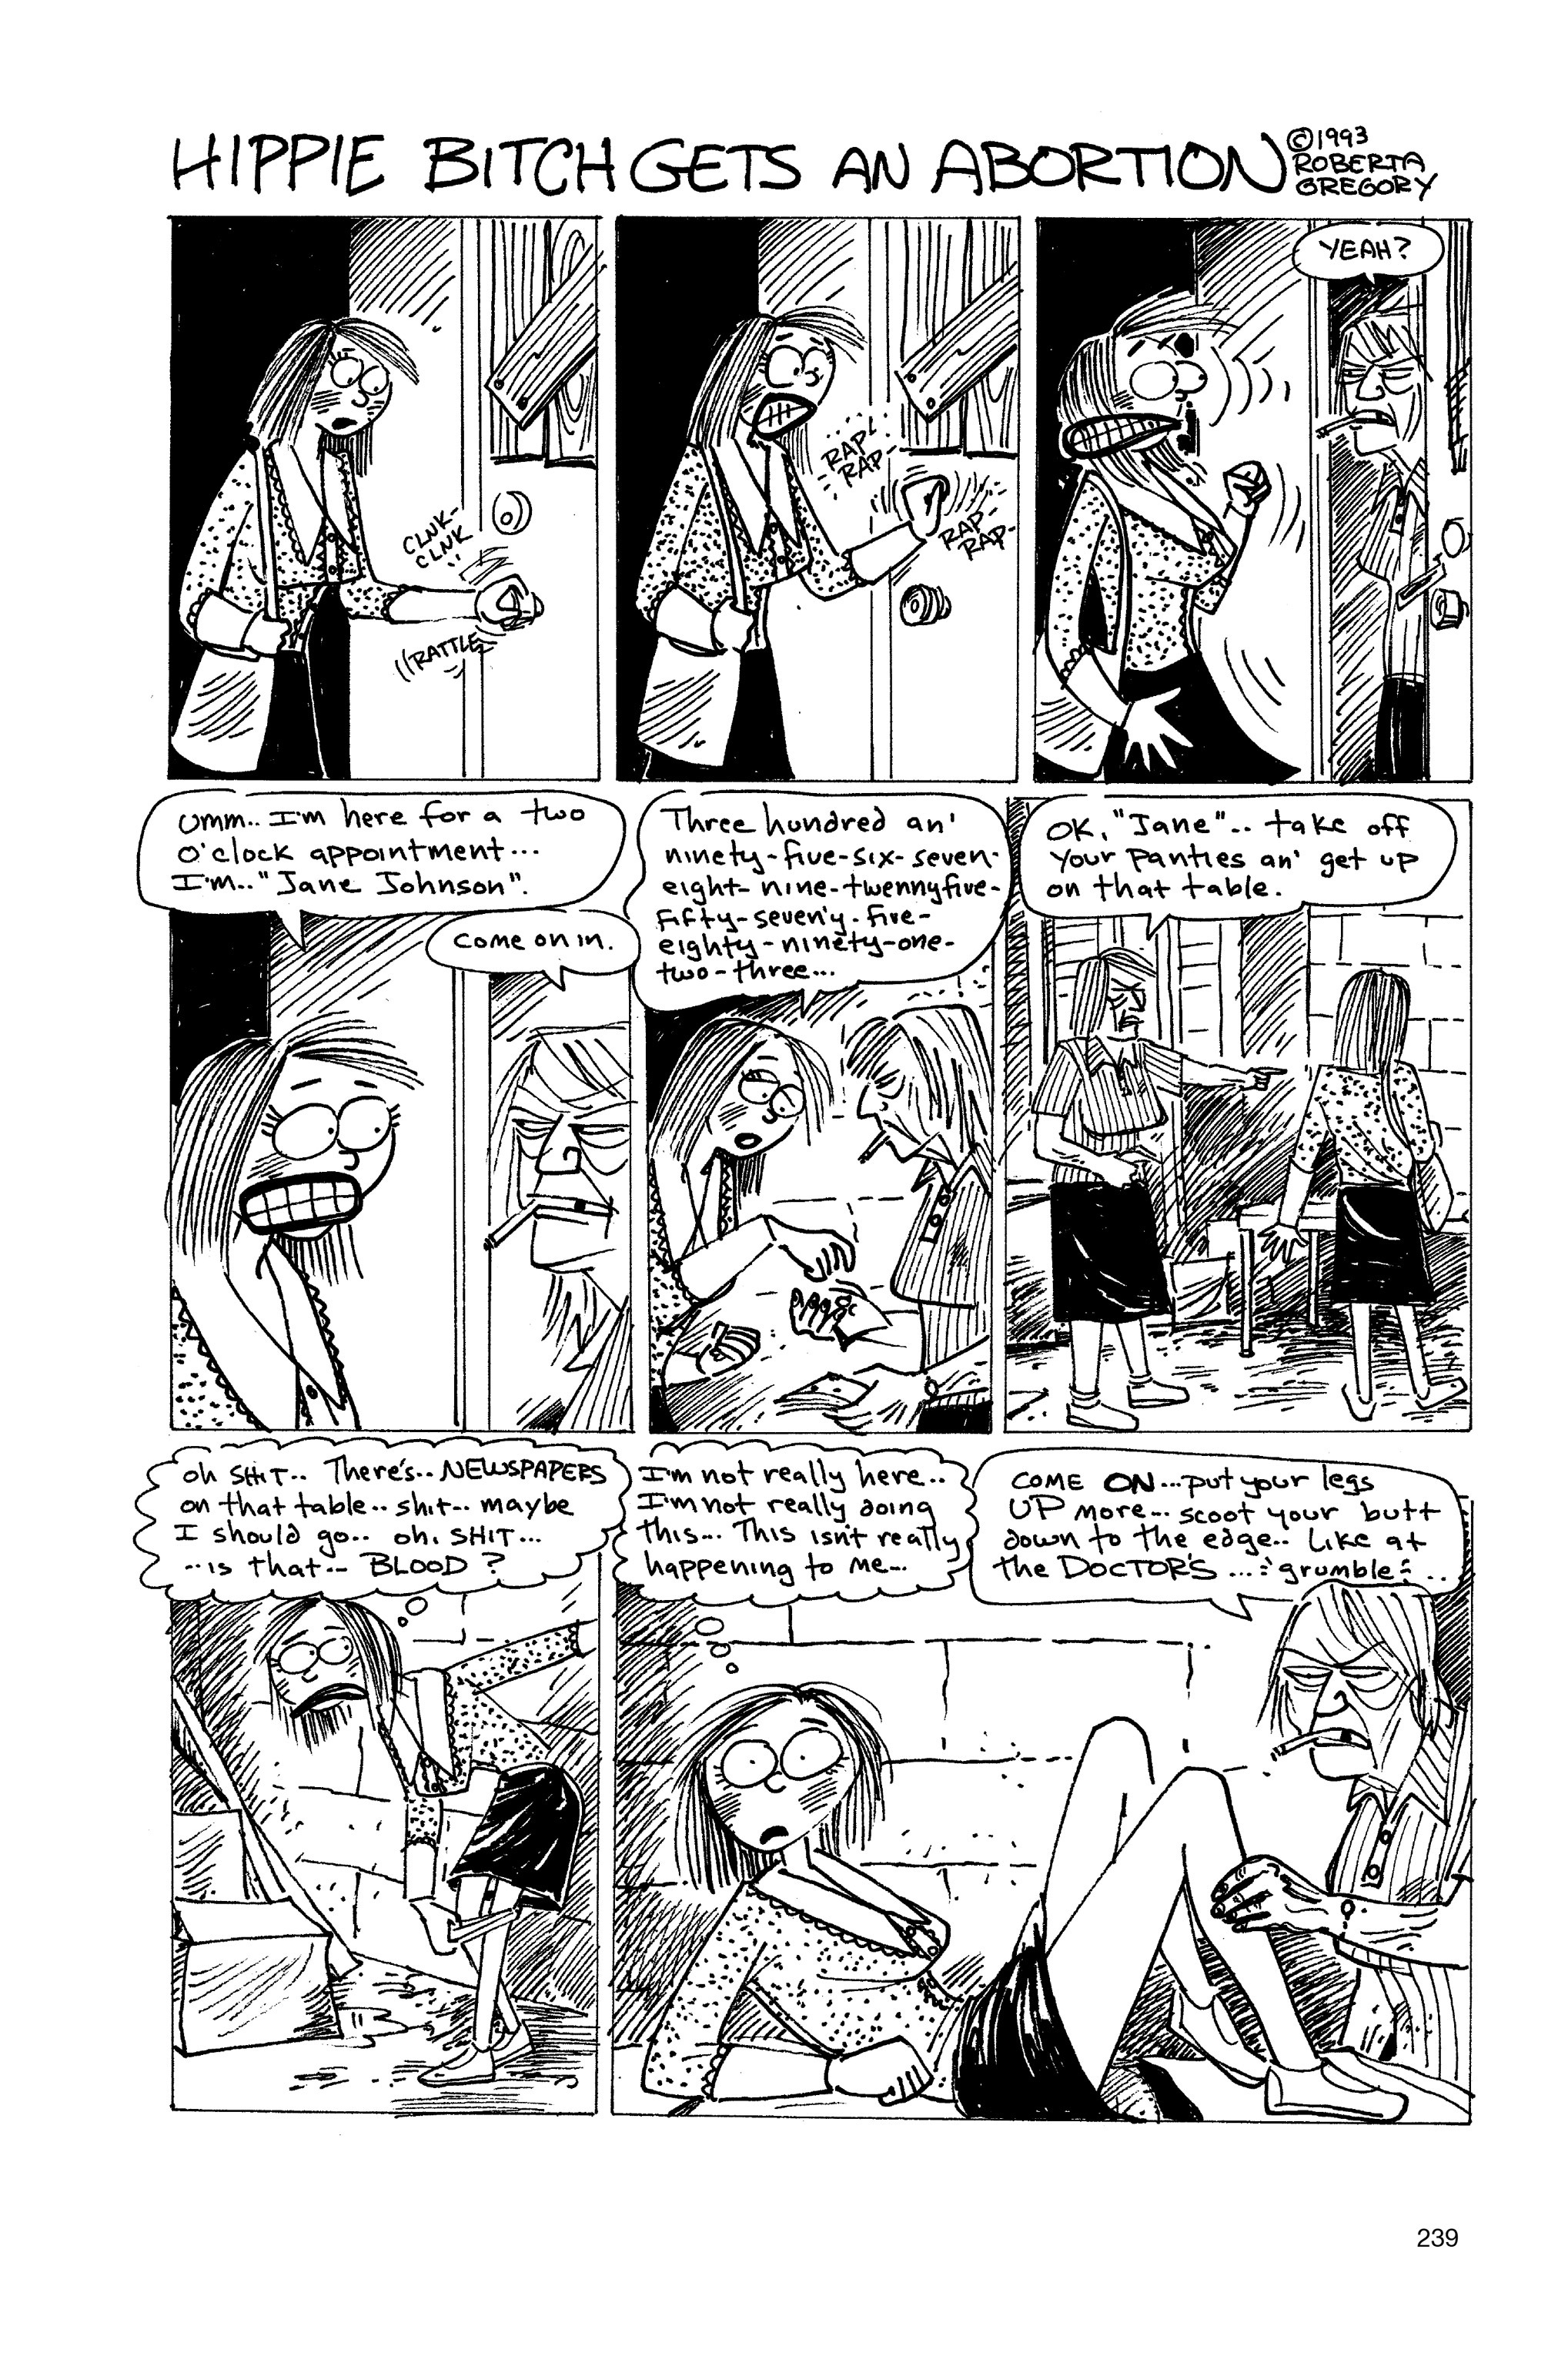 Read online Life's a Bitch: The Complete Bitchy Bitch Stories comic -  Issue # TPB (Part 3) - 33